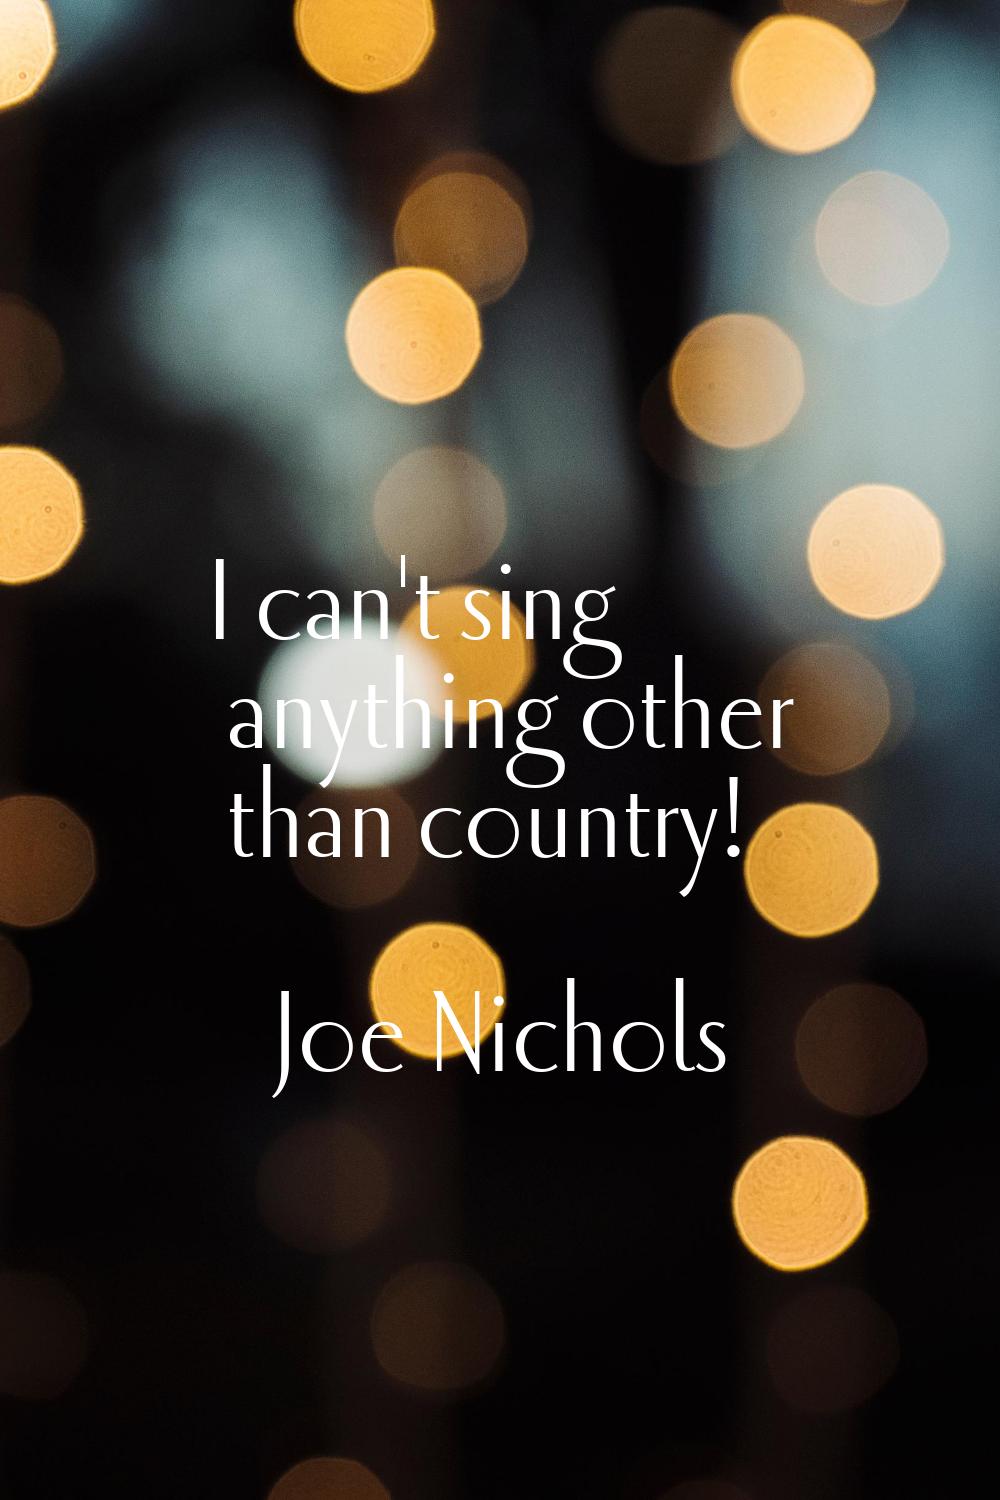 I can't sing anything other than country!